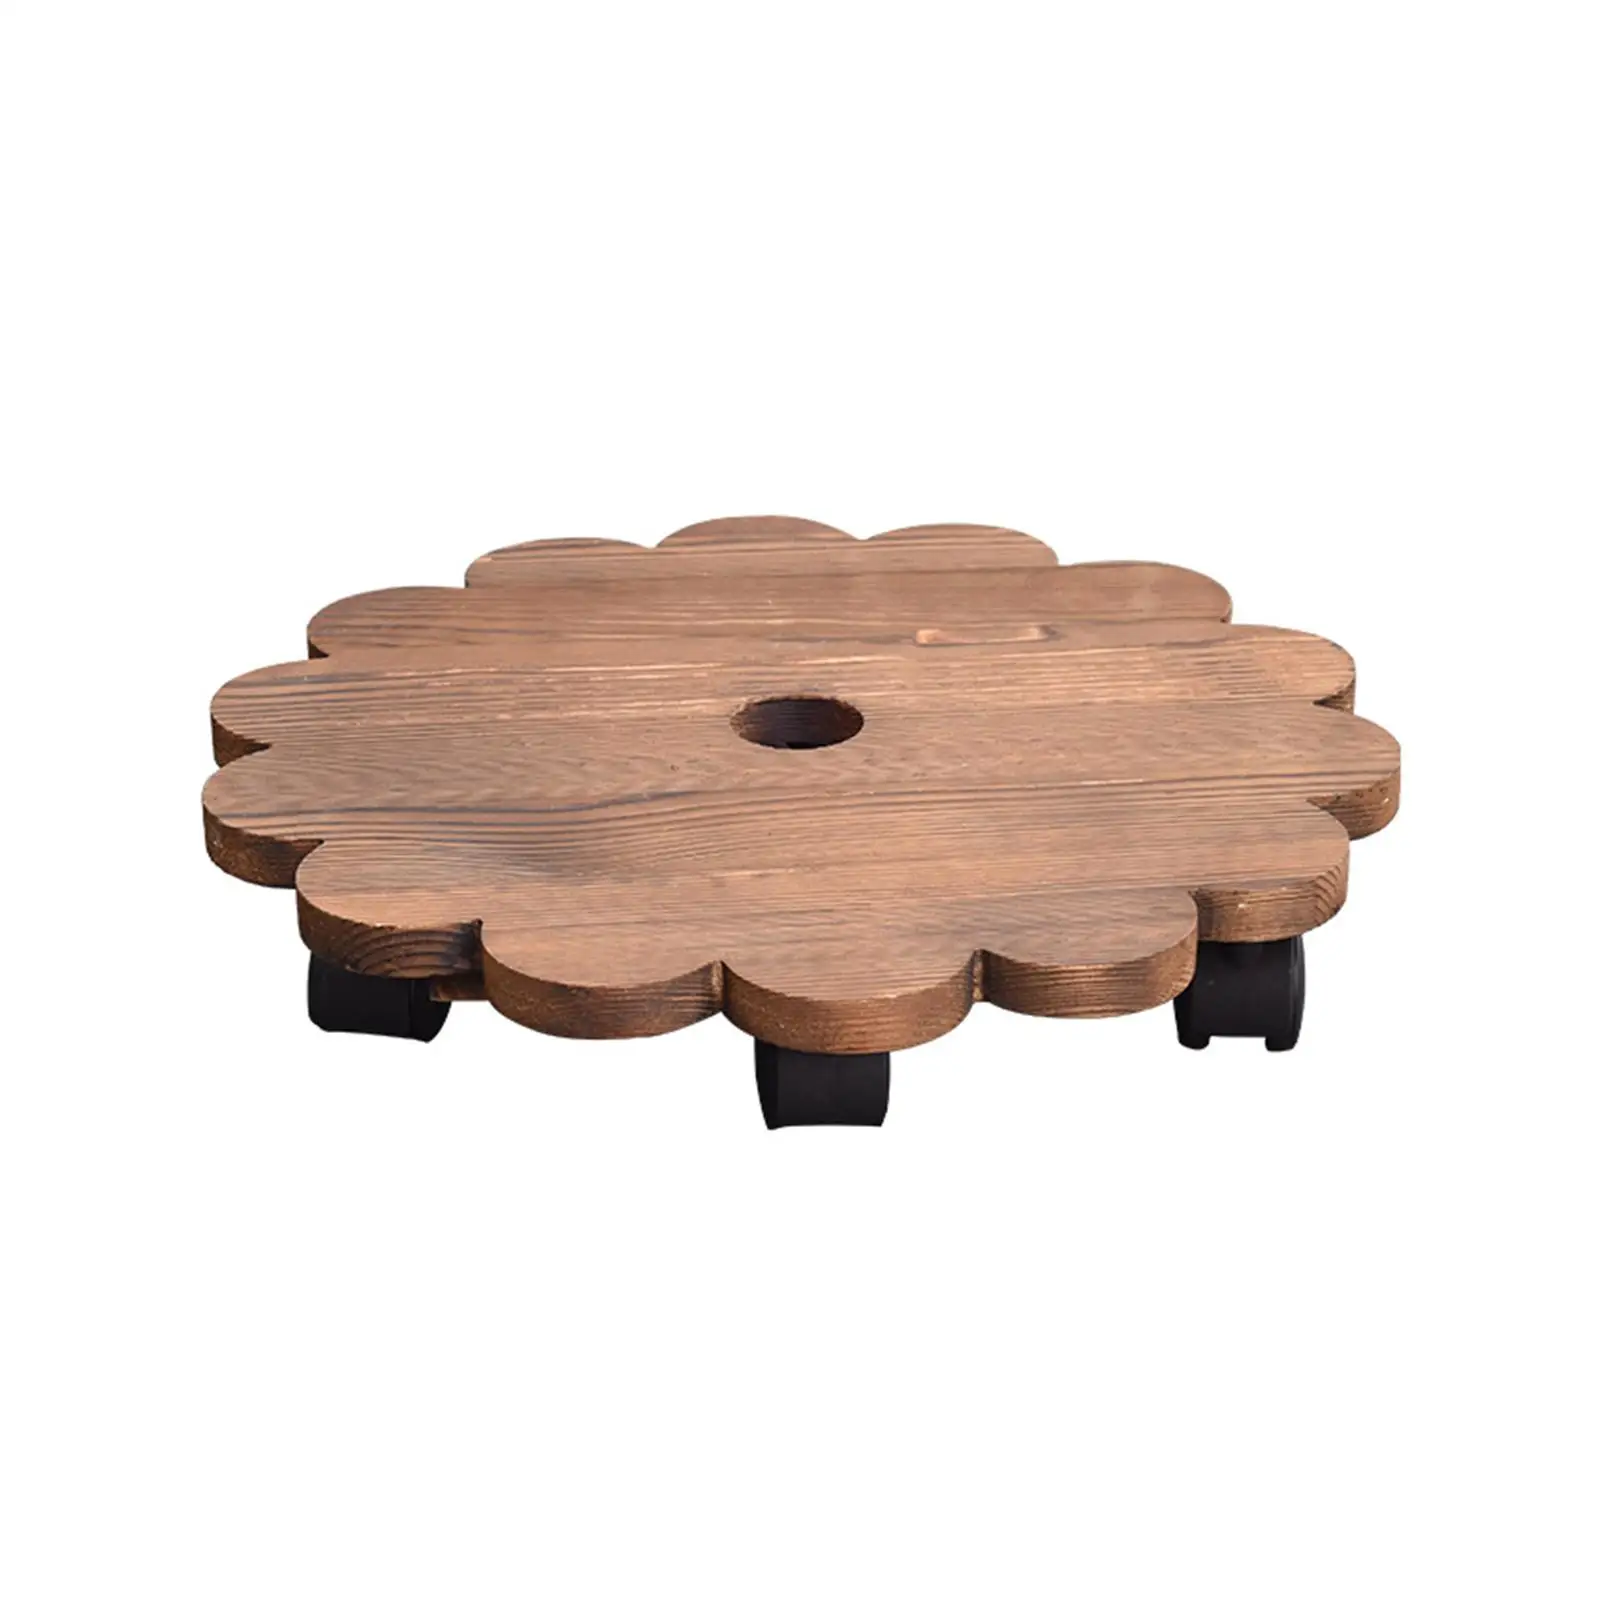 Plant Stand with Wheel Heavy Duty Pot Plant Roller Base Wooden Plant Roller Flowerpot Base Roller for Indoor Outdoor Garden